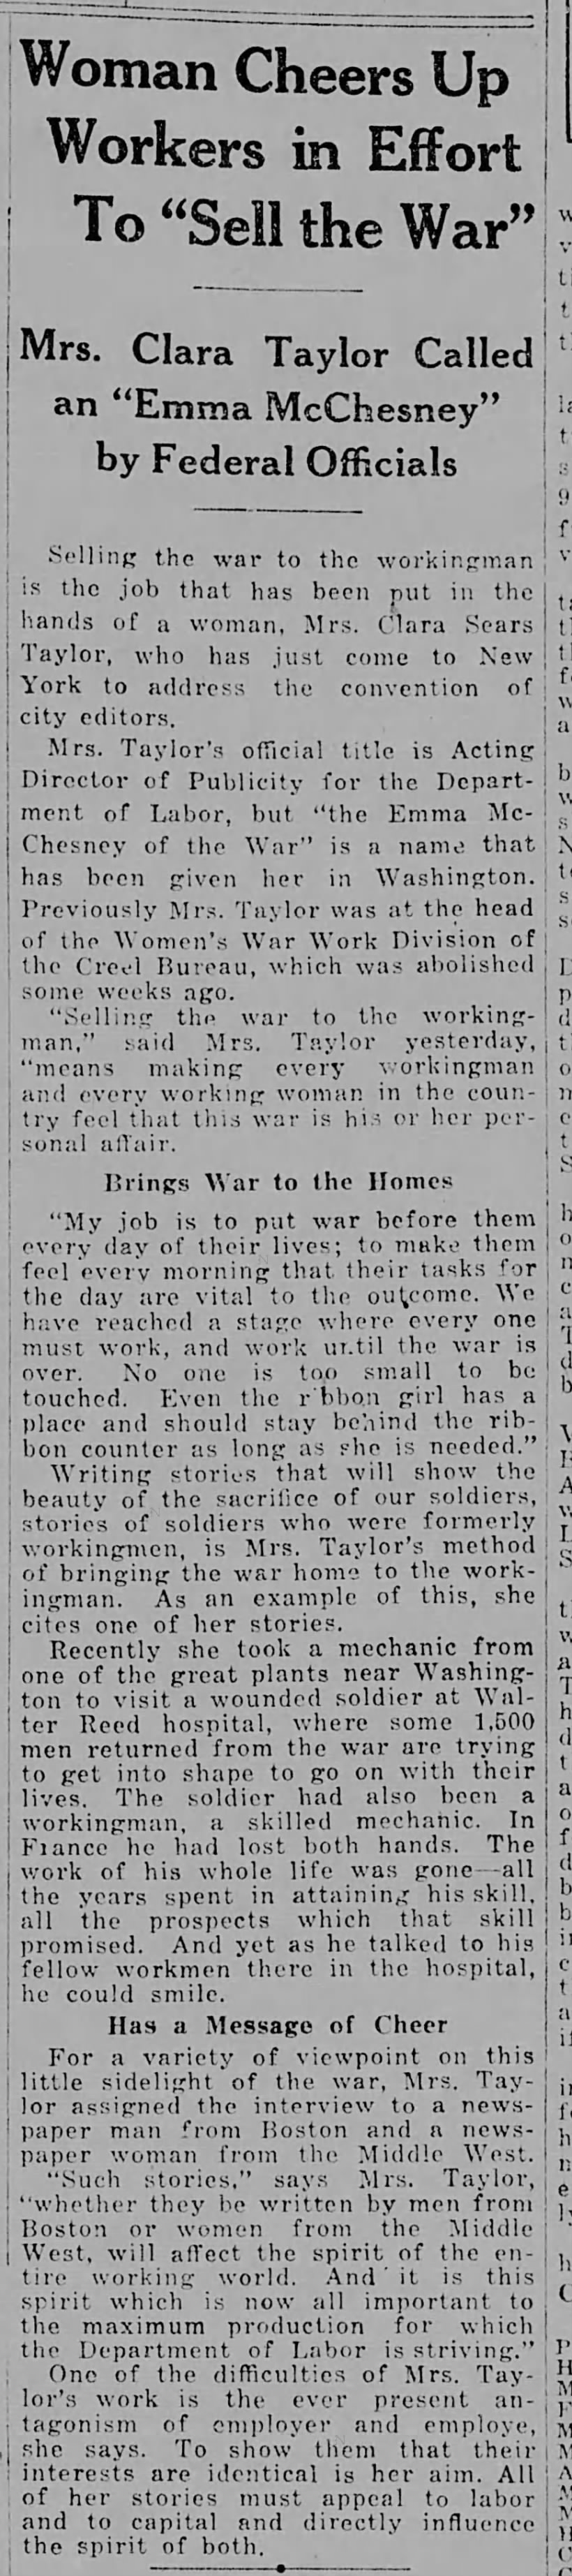 "Woman Cheers Up Workers in Effort to Sell the War" (1918)